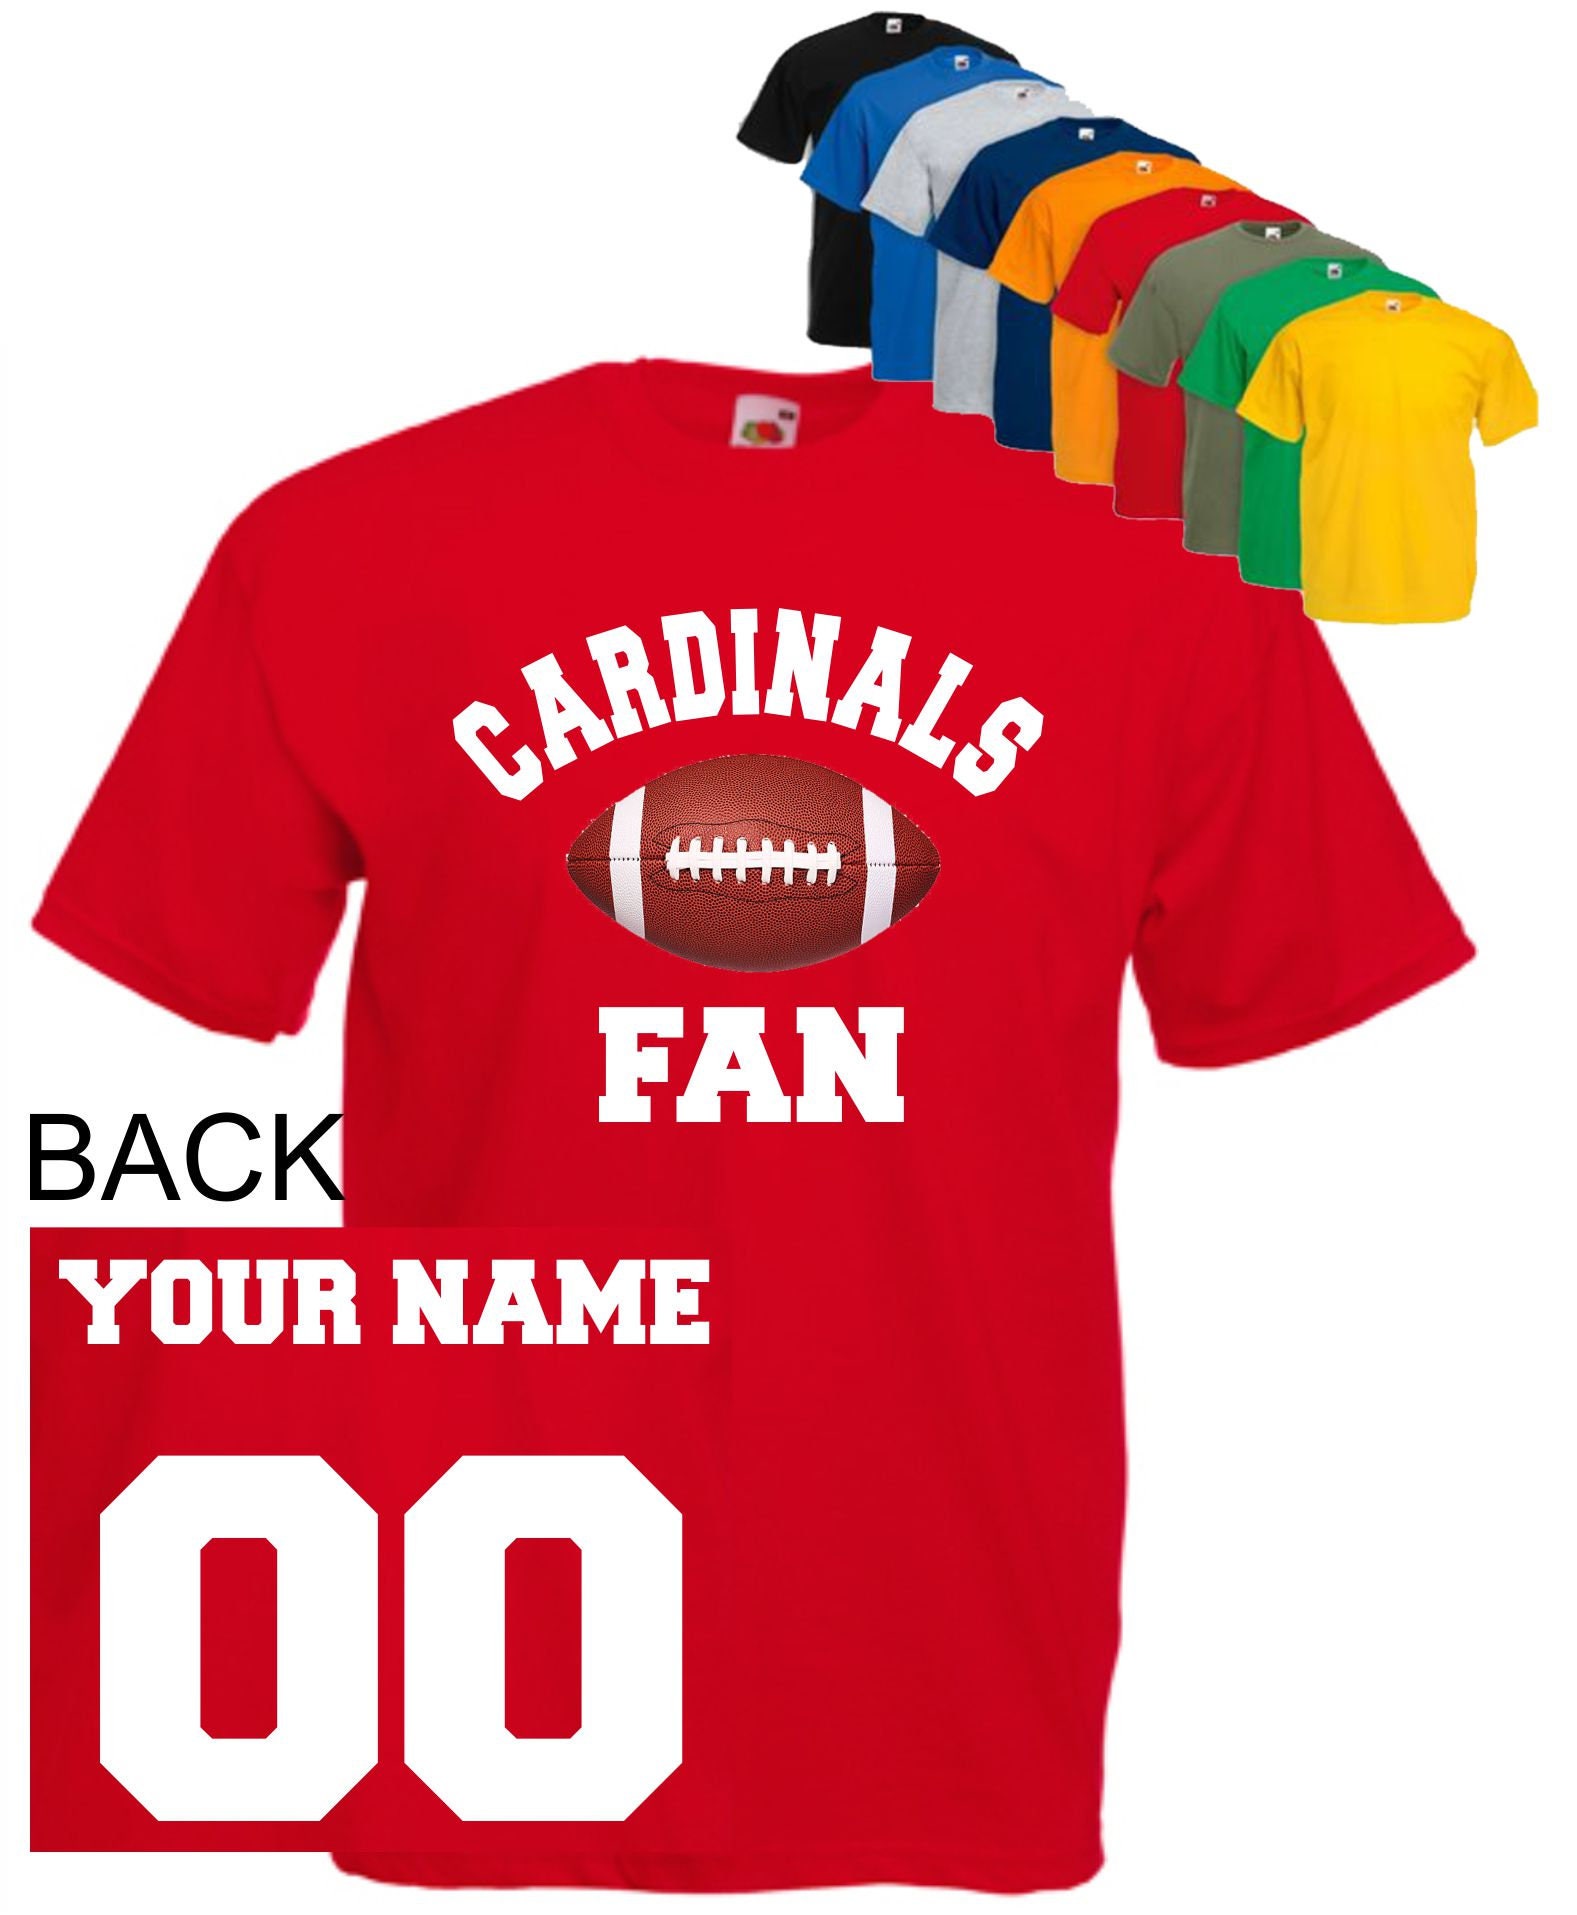 St. Louis Cardinals MLB Custom Number And Name 3D Hoodie For Men And Women  Gift Fans - Banantees